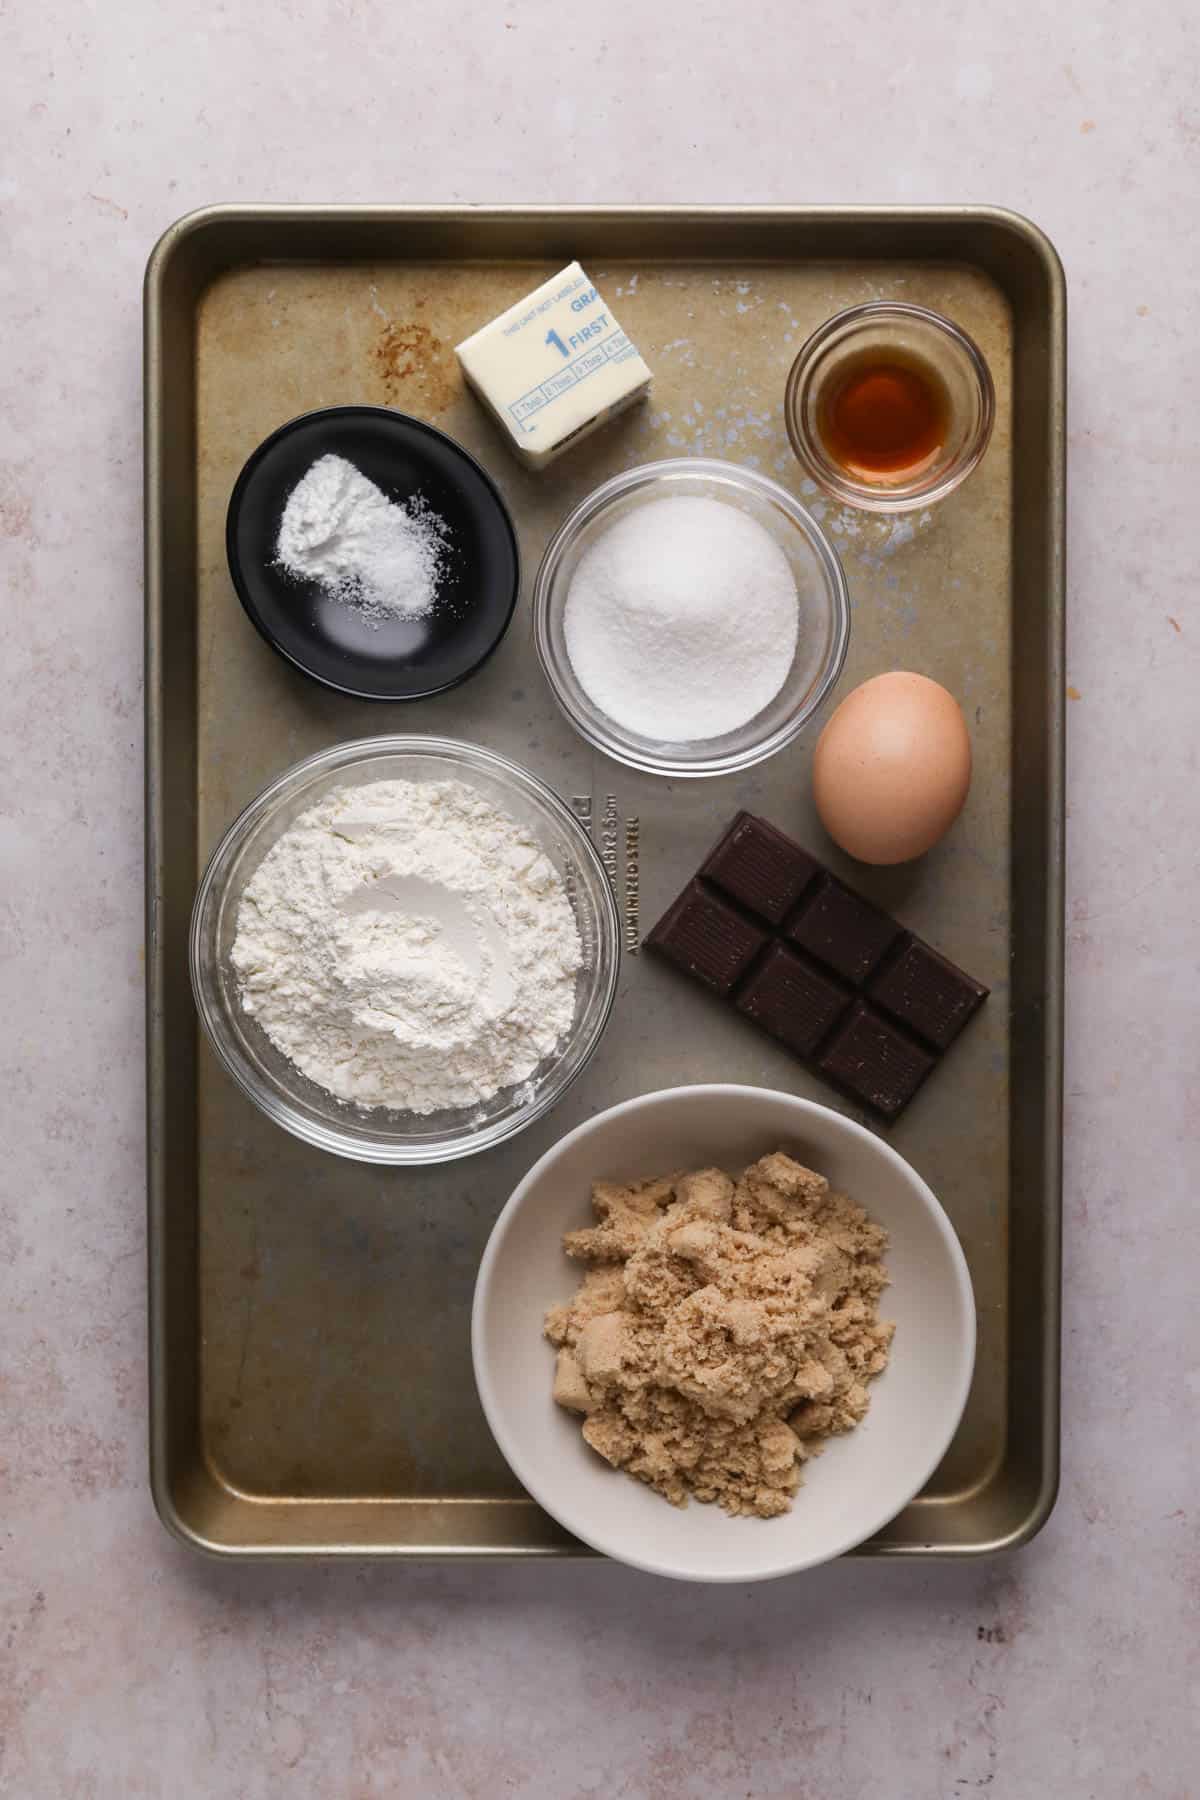 Ingredients for blondie batter in bowls on a sheet pan.